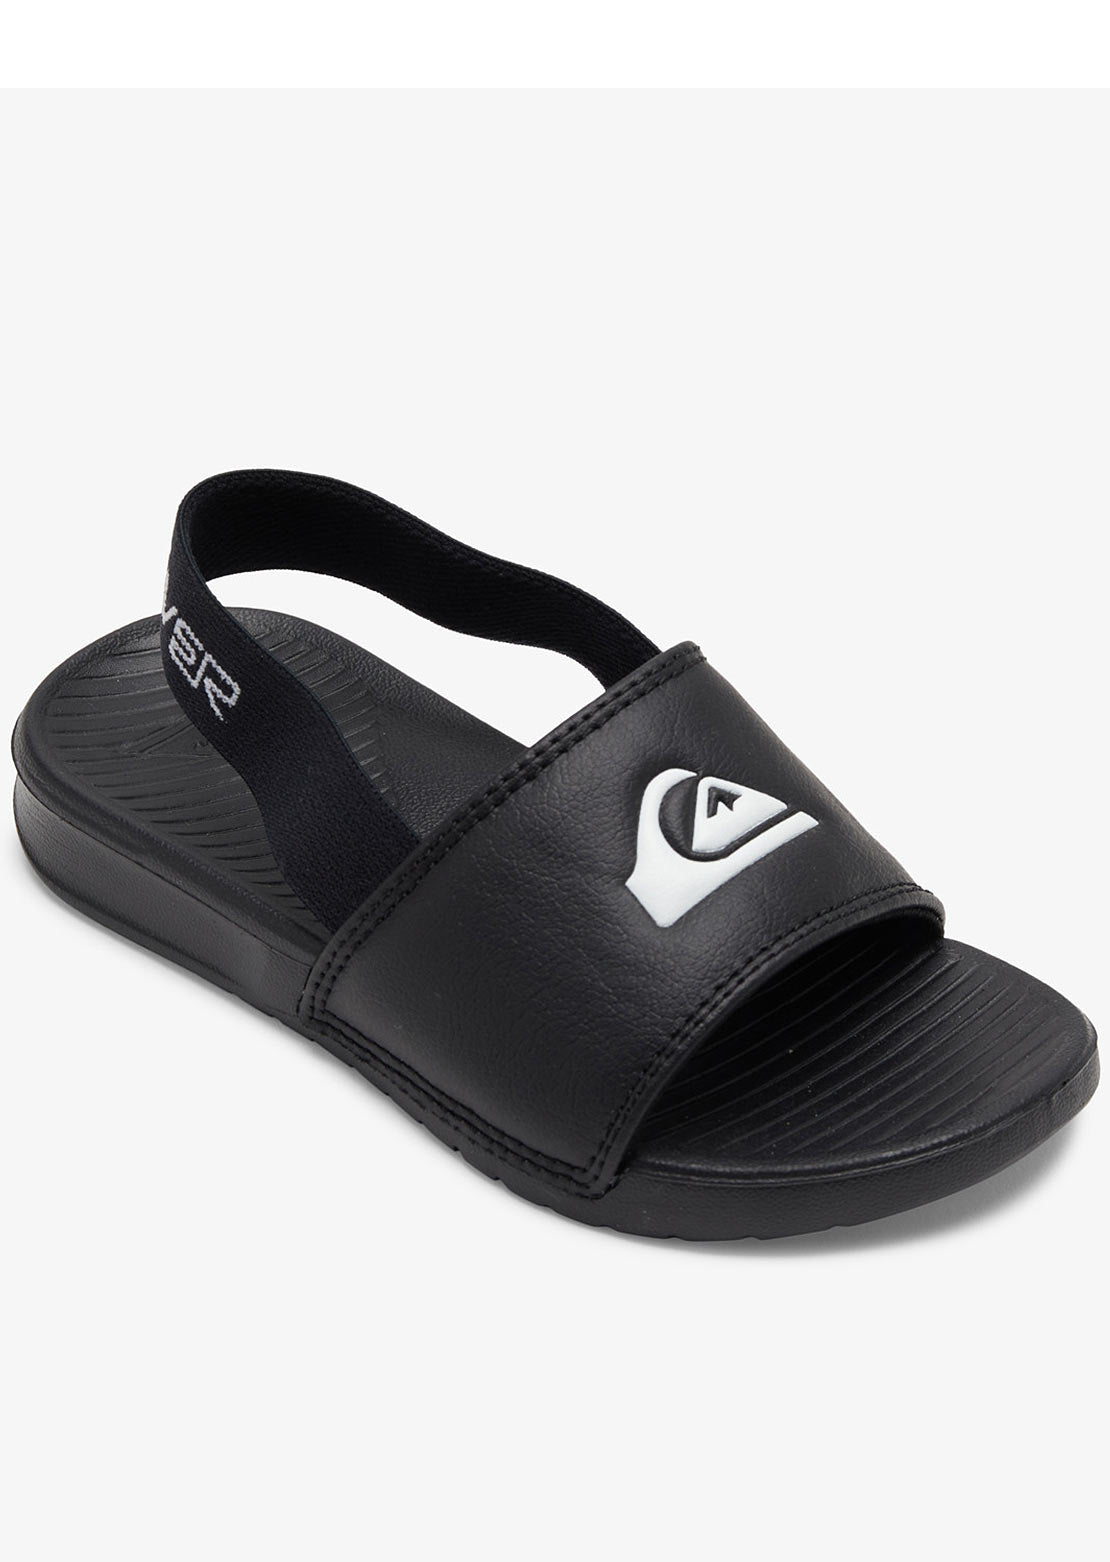 Quiksilver Toddler Bright Coast Strapped Sandals Black/White/Black